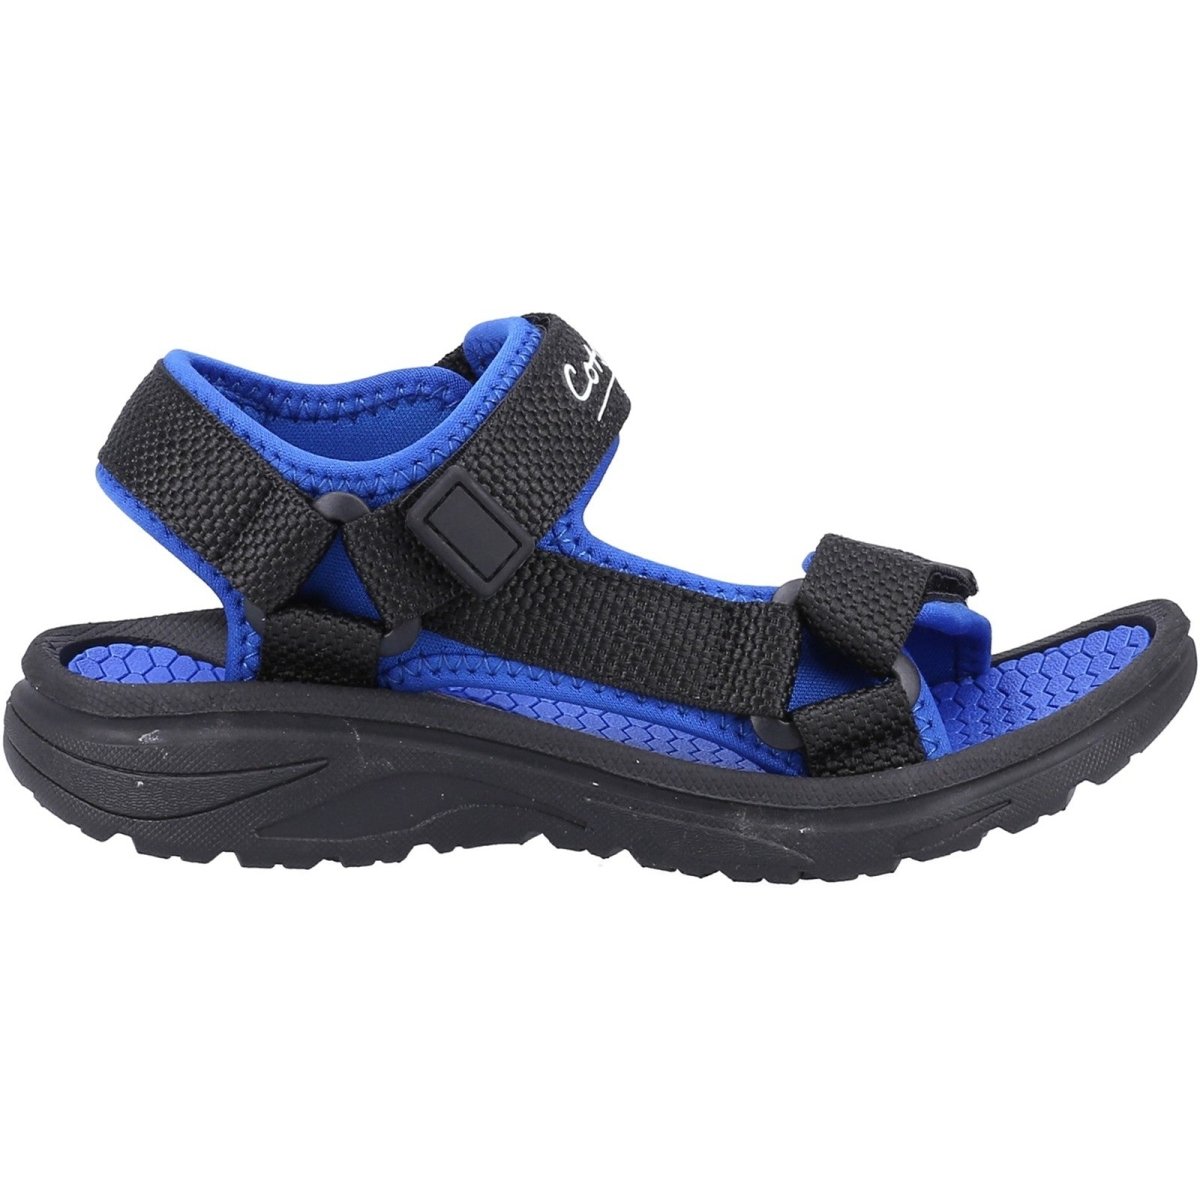 Cotswold Bodiam Kids Eco-Friendly Summer Recycled Sandals - Shoe Store Direct